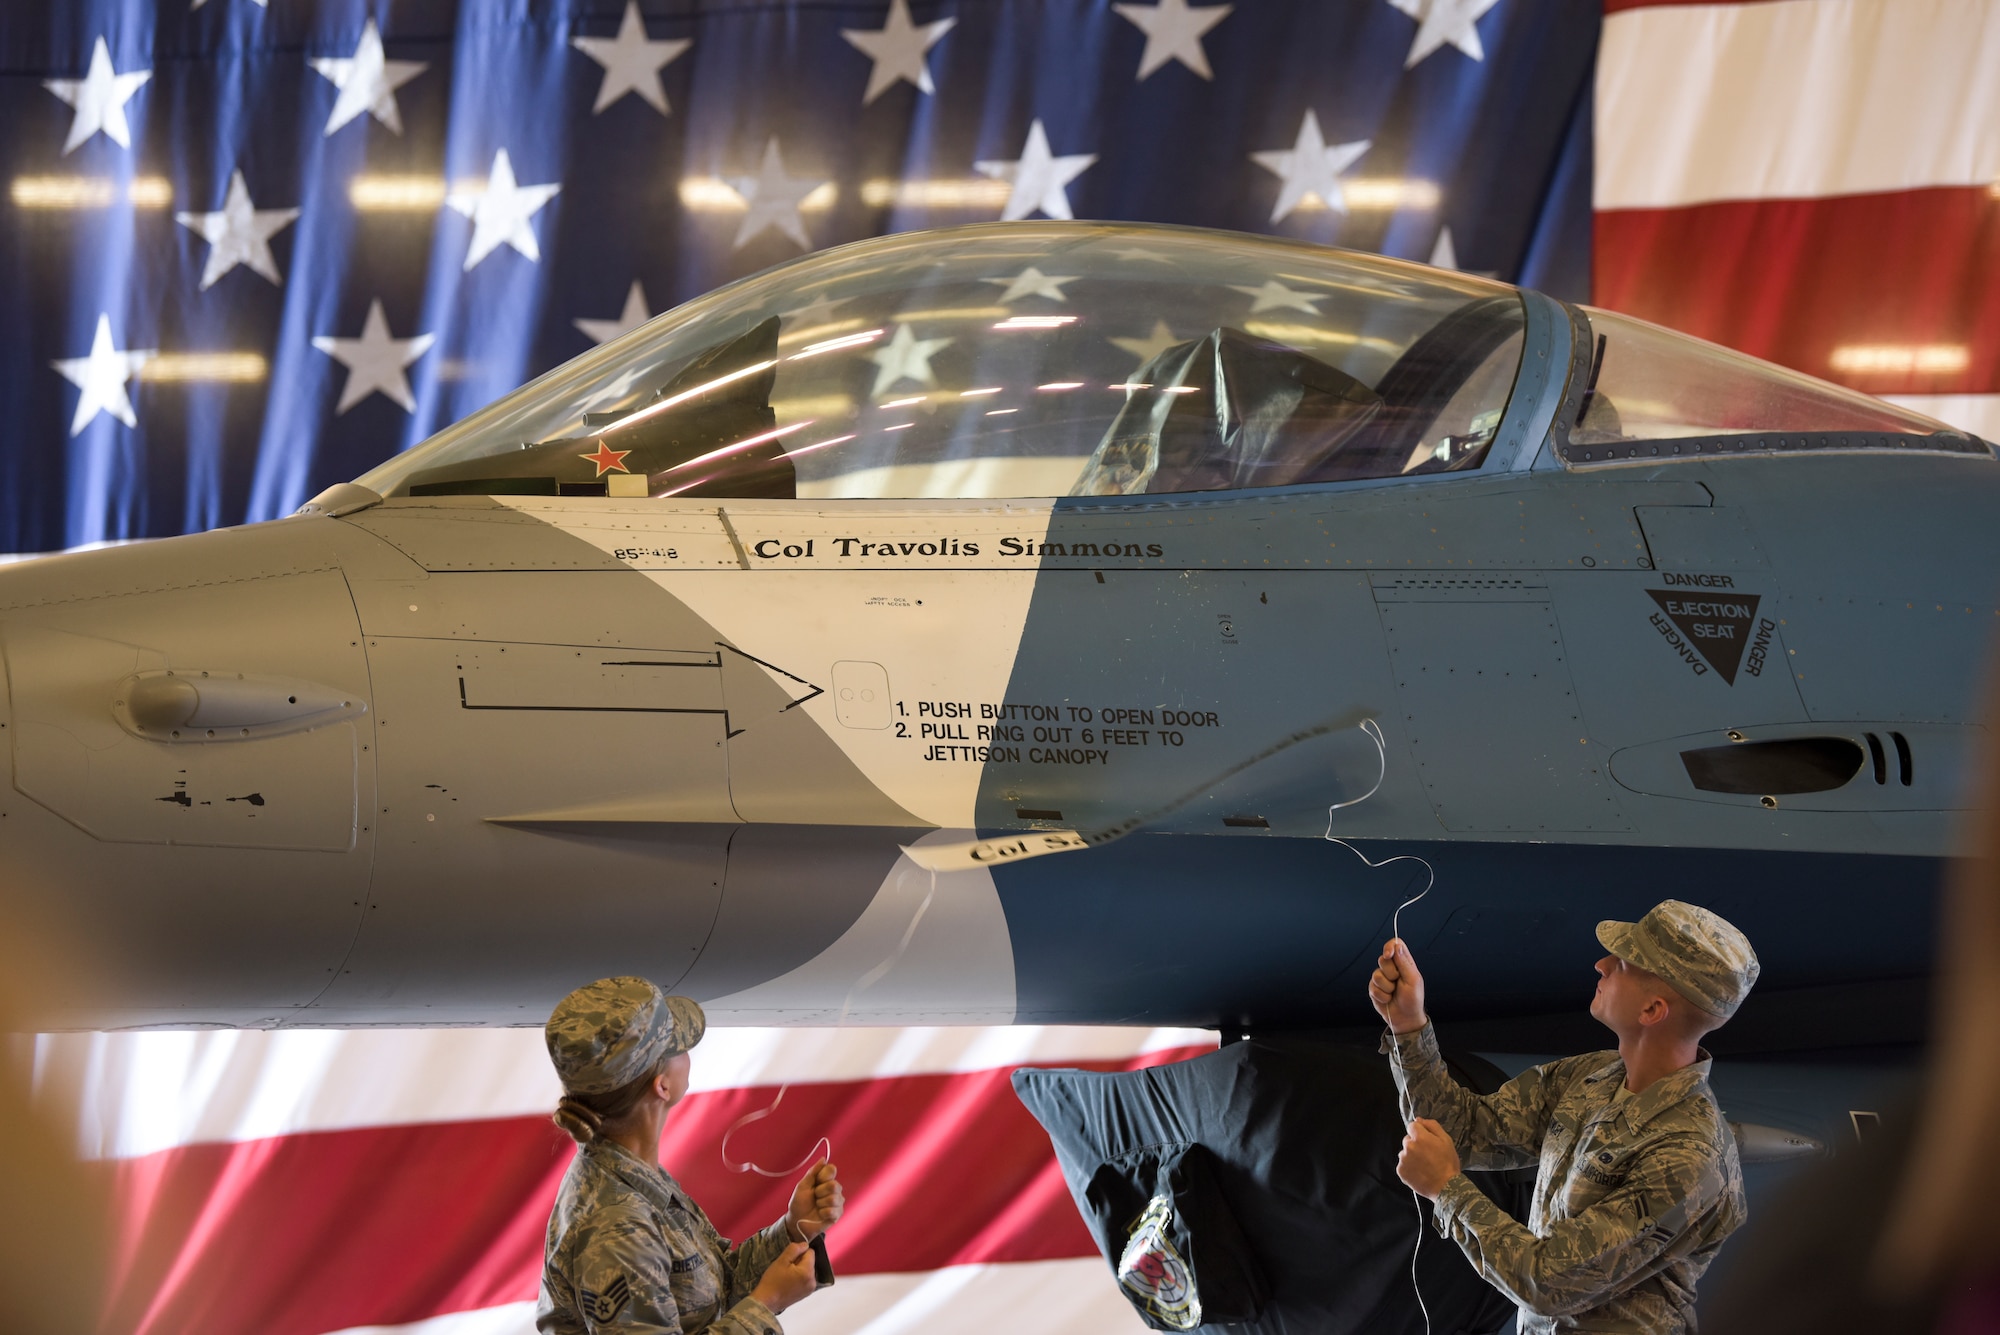 Airmen assigned to the 57th Aircraft Maintenance Squadron Viper Aircraft Maintenance Unit reveal the 57th Adversary Tactics Group incoming commander’s name during a change of command ceremony at Nellis Air Force Base, Nevada, Aug. 8, 2018. The 57th ATG boasts the world’s most capable and professional aggressor force to train US personnel and coalition partners during exercises and deployments. (U.S. Air Force photo by Airman 1st Class Andrew D. Sarver)